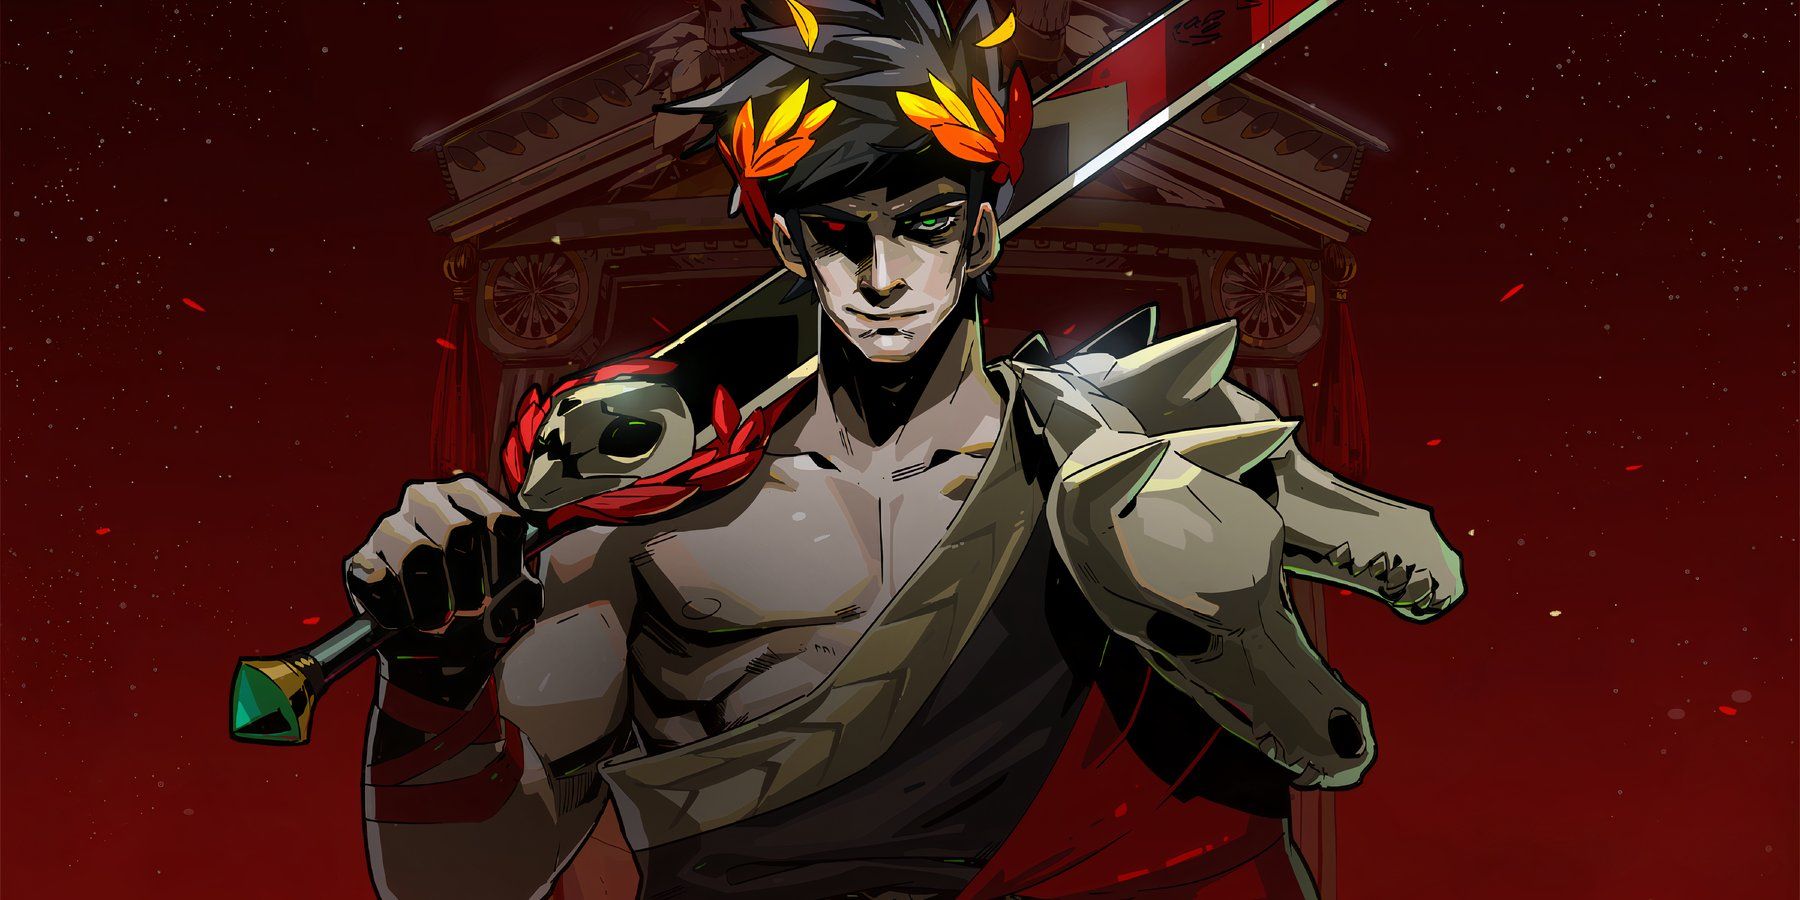 Hades Zagreus stands sword on shoulder, red background, red eye glowing